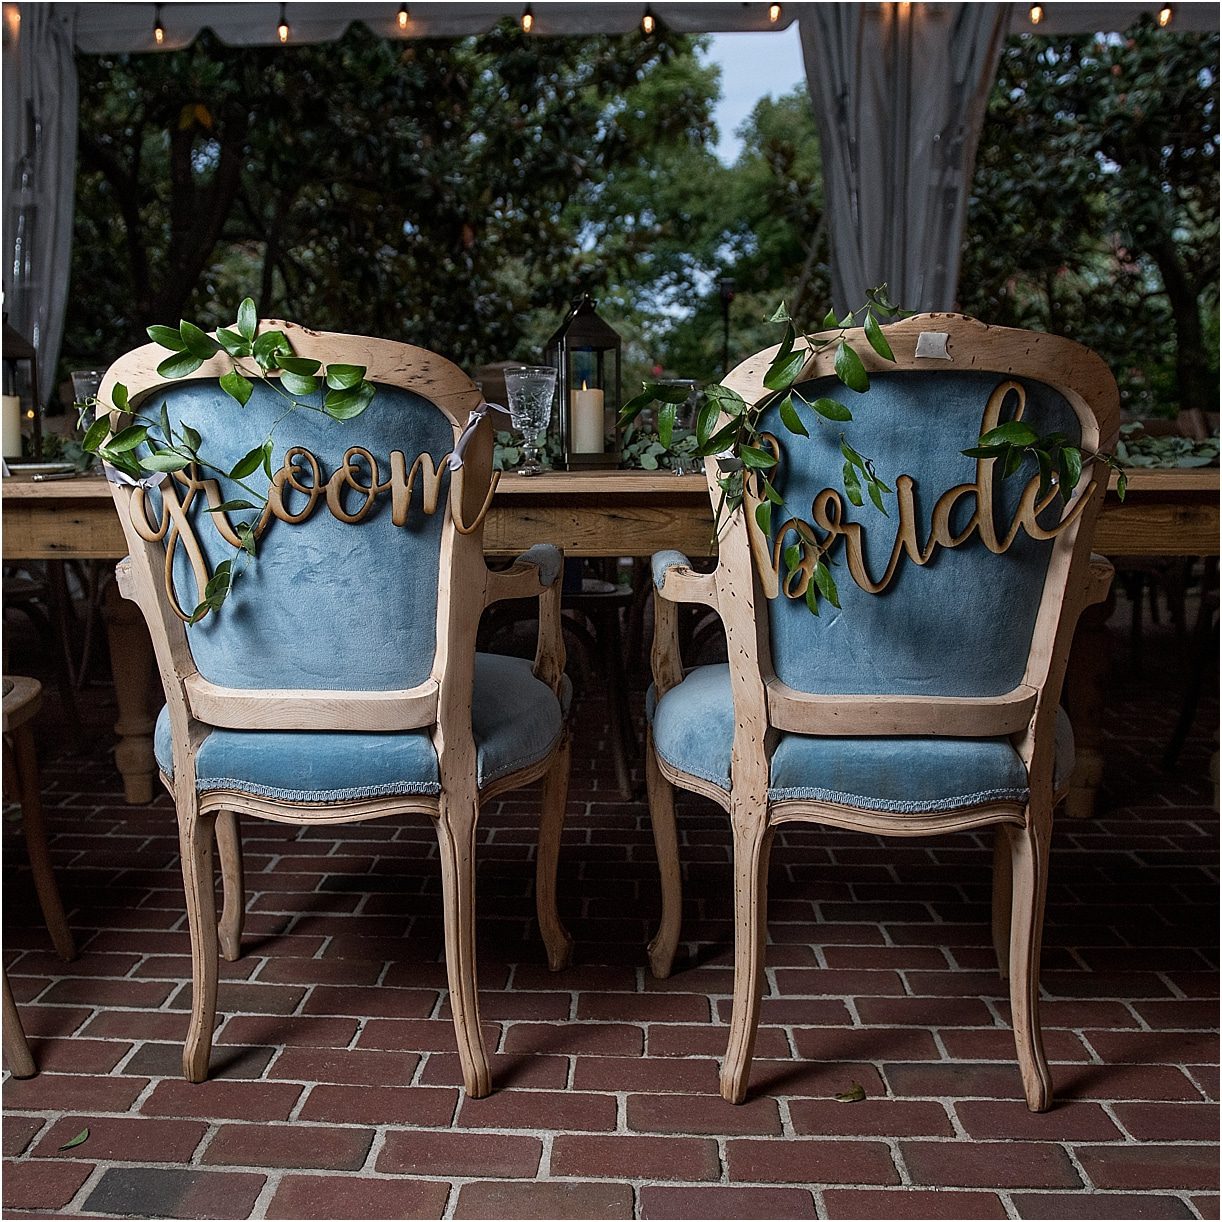 Blue Outdoor Wedding in Alexandria Virginia with Perfect Details | Hill City Bride Blog for Ideas and Inspiration Alexandria Chair Signs Signage